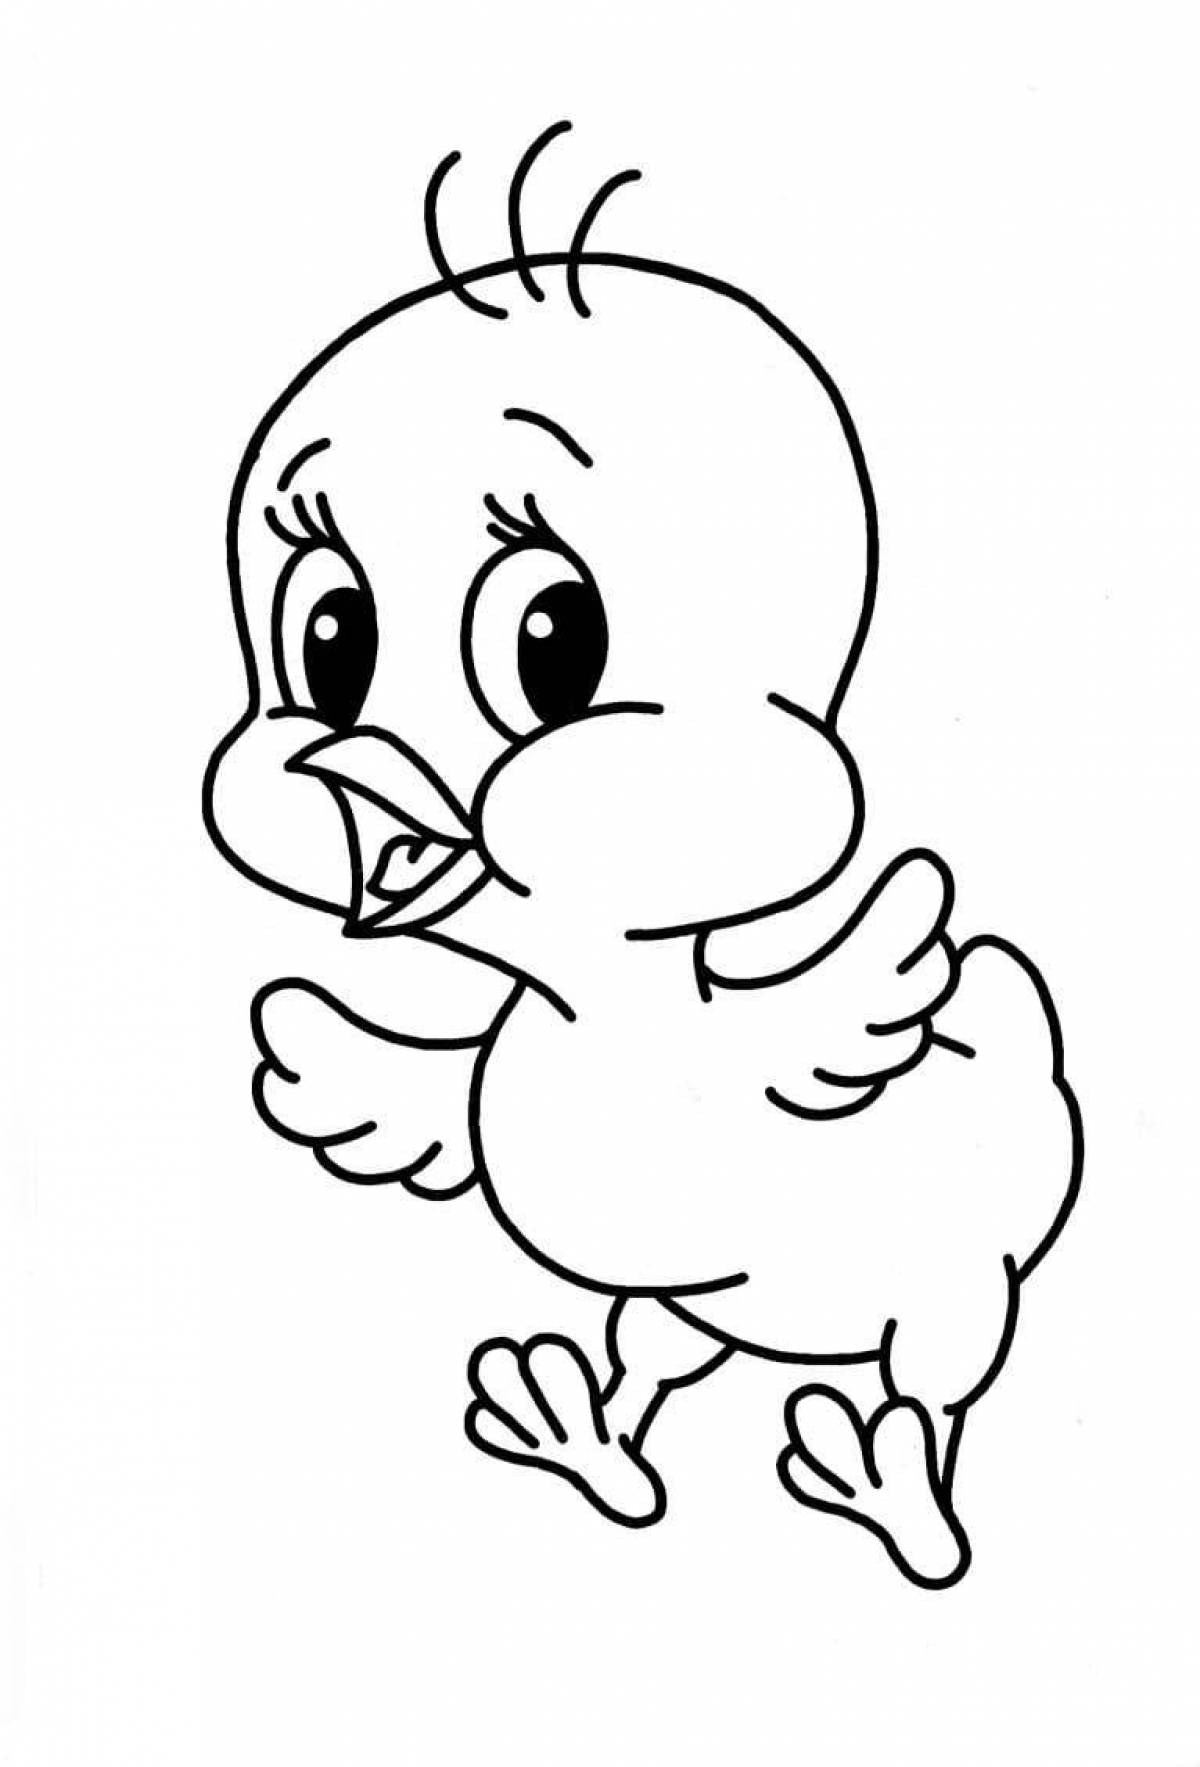 Adorable chick coloring book for 3-4 year olds